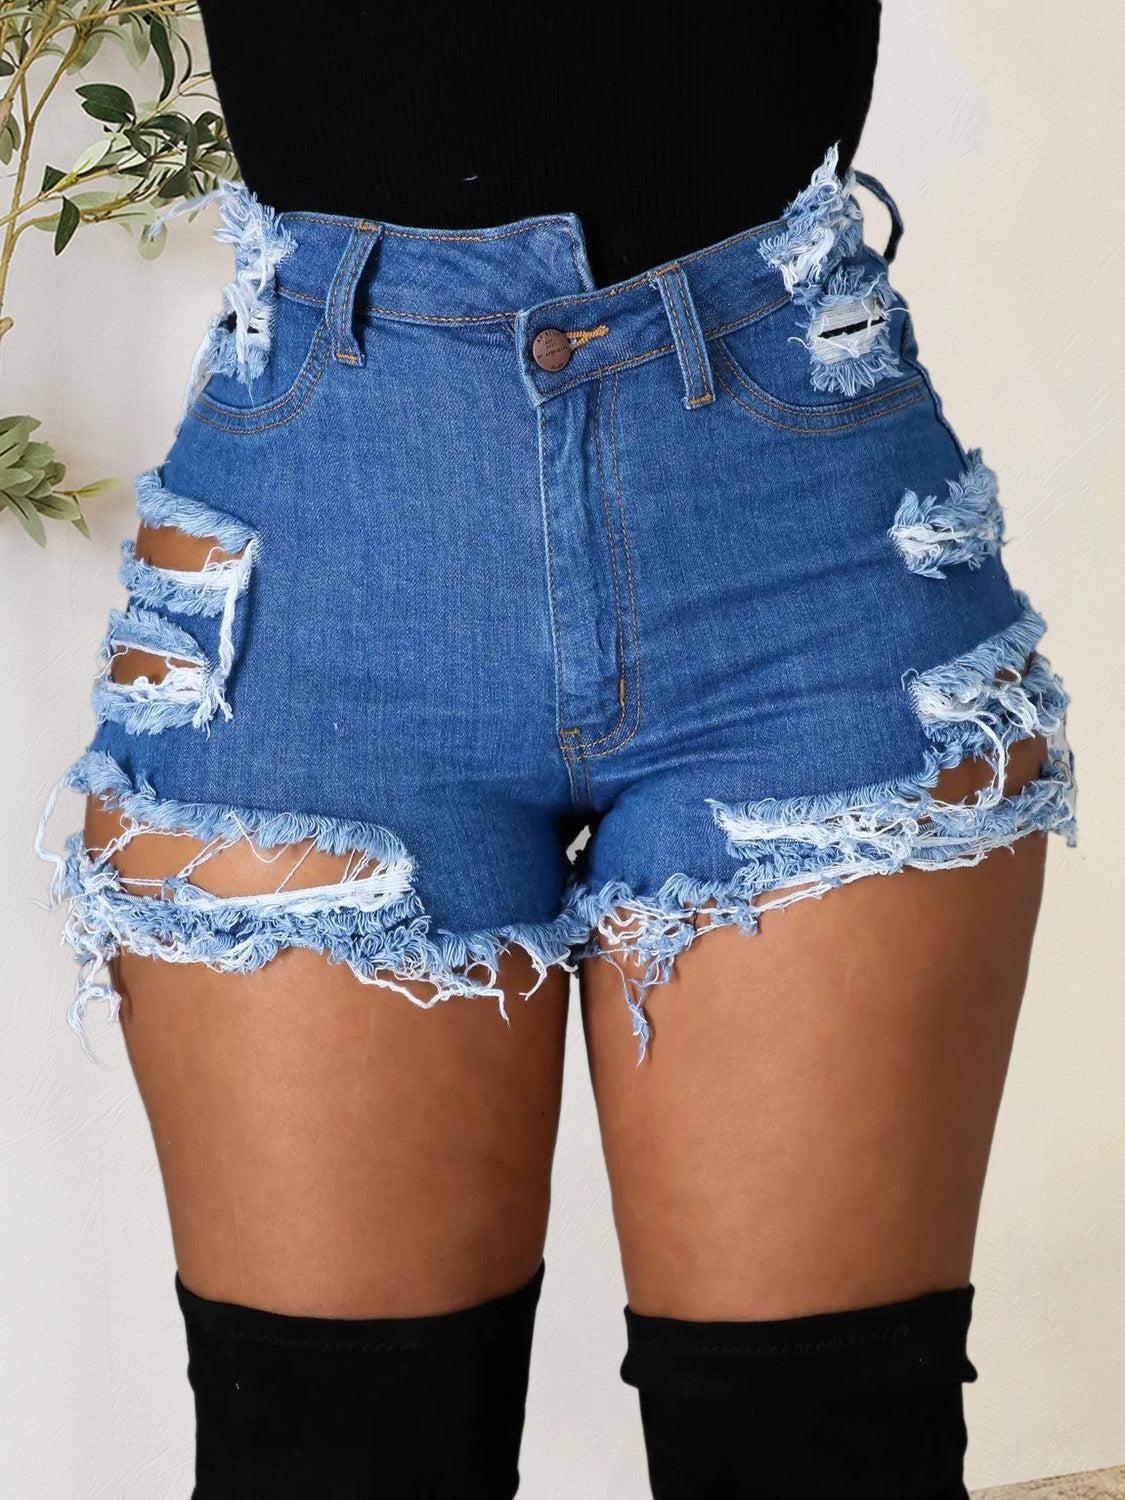 a woman wearing a pair of high waisted denim shorts